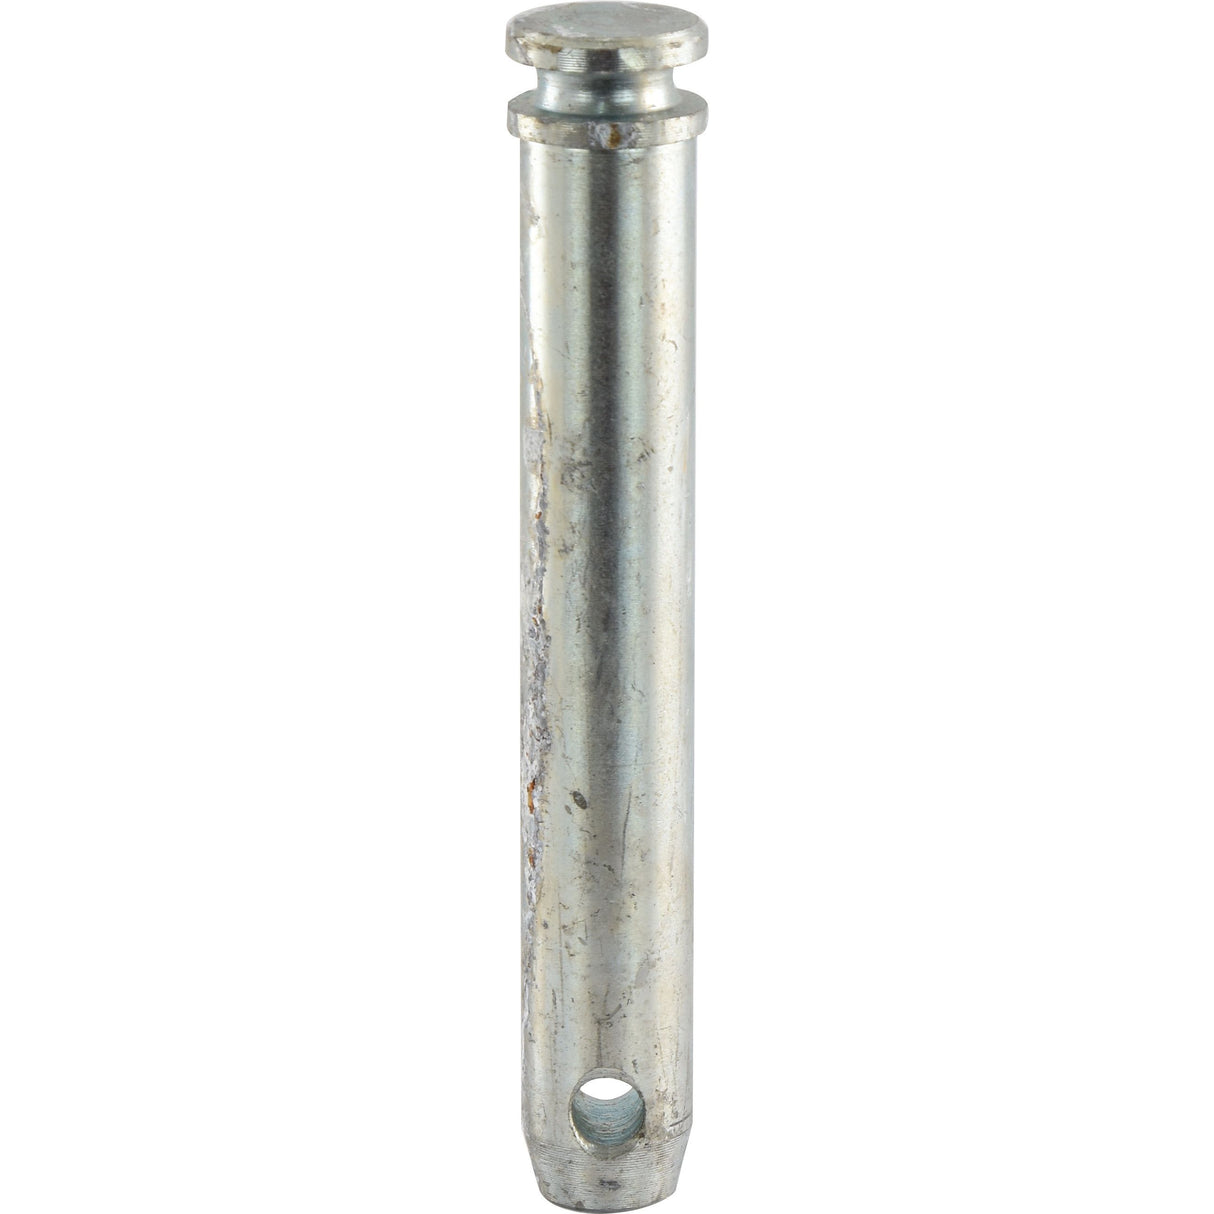 Lower link pin 28x178mm Cat. 2
 - S.112 - Farming Parts